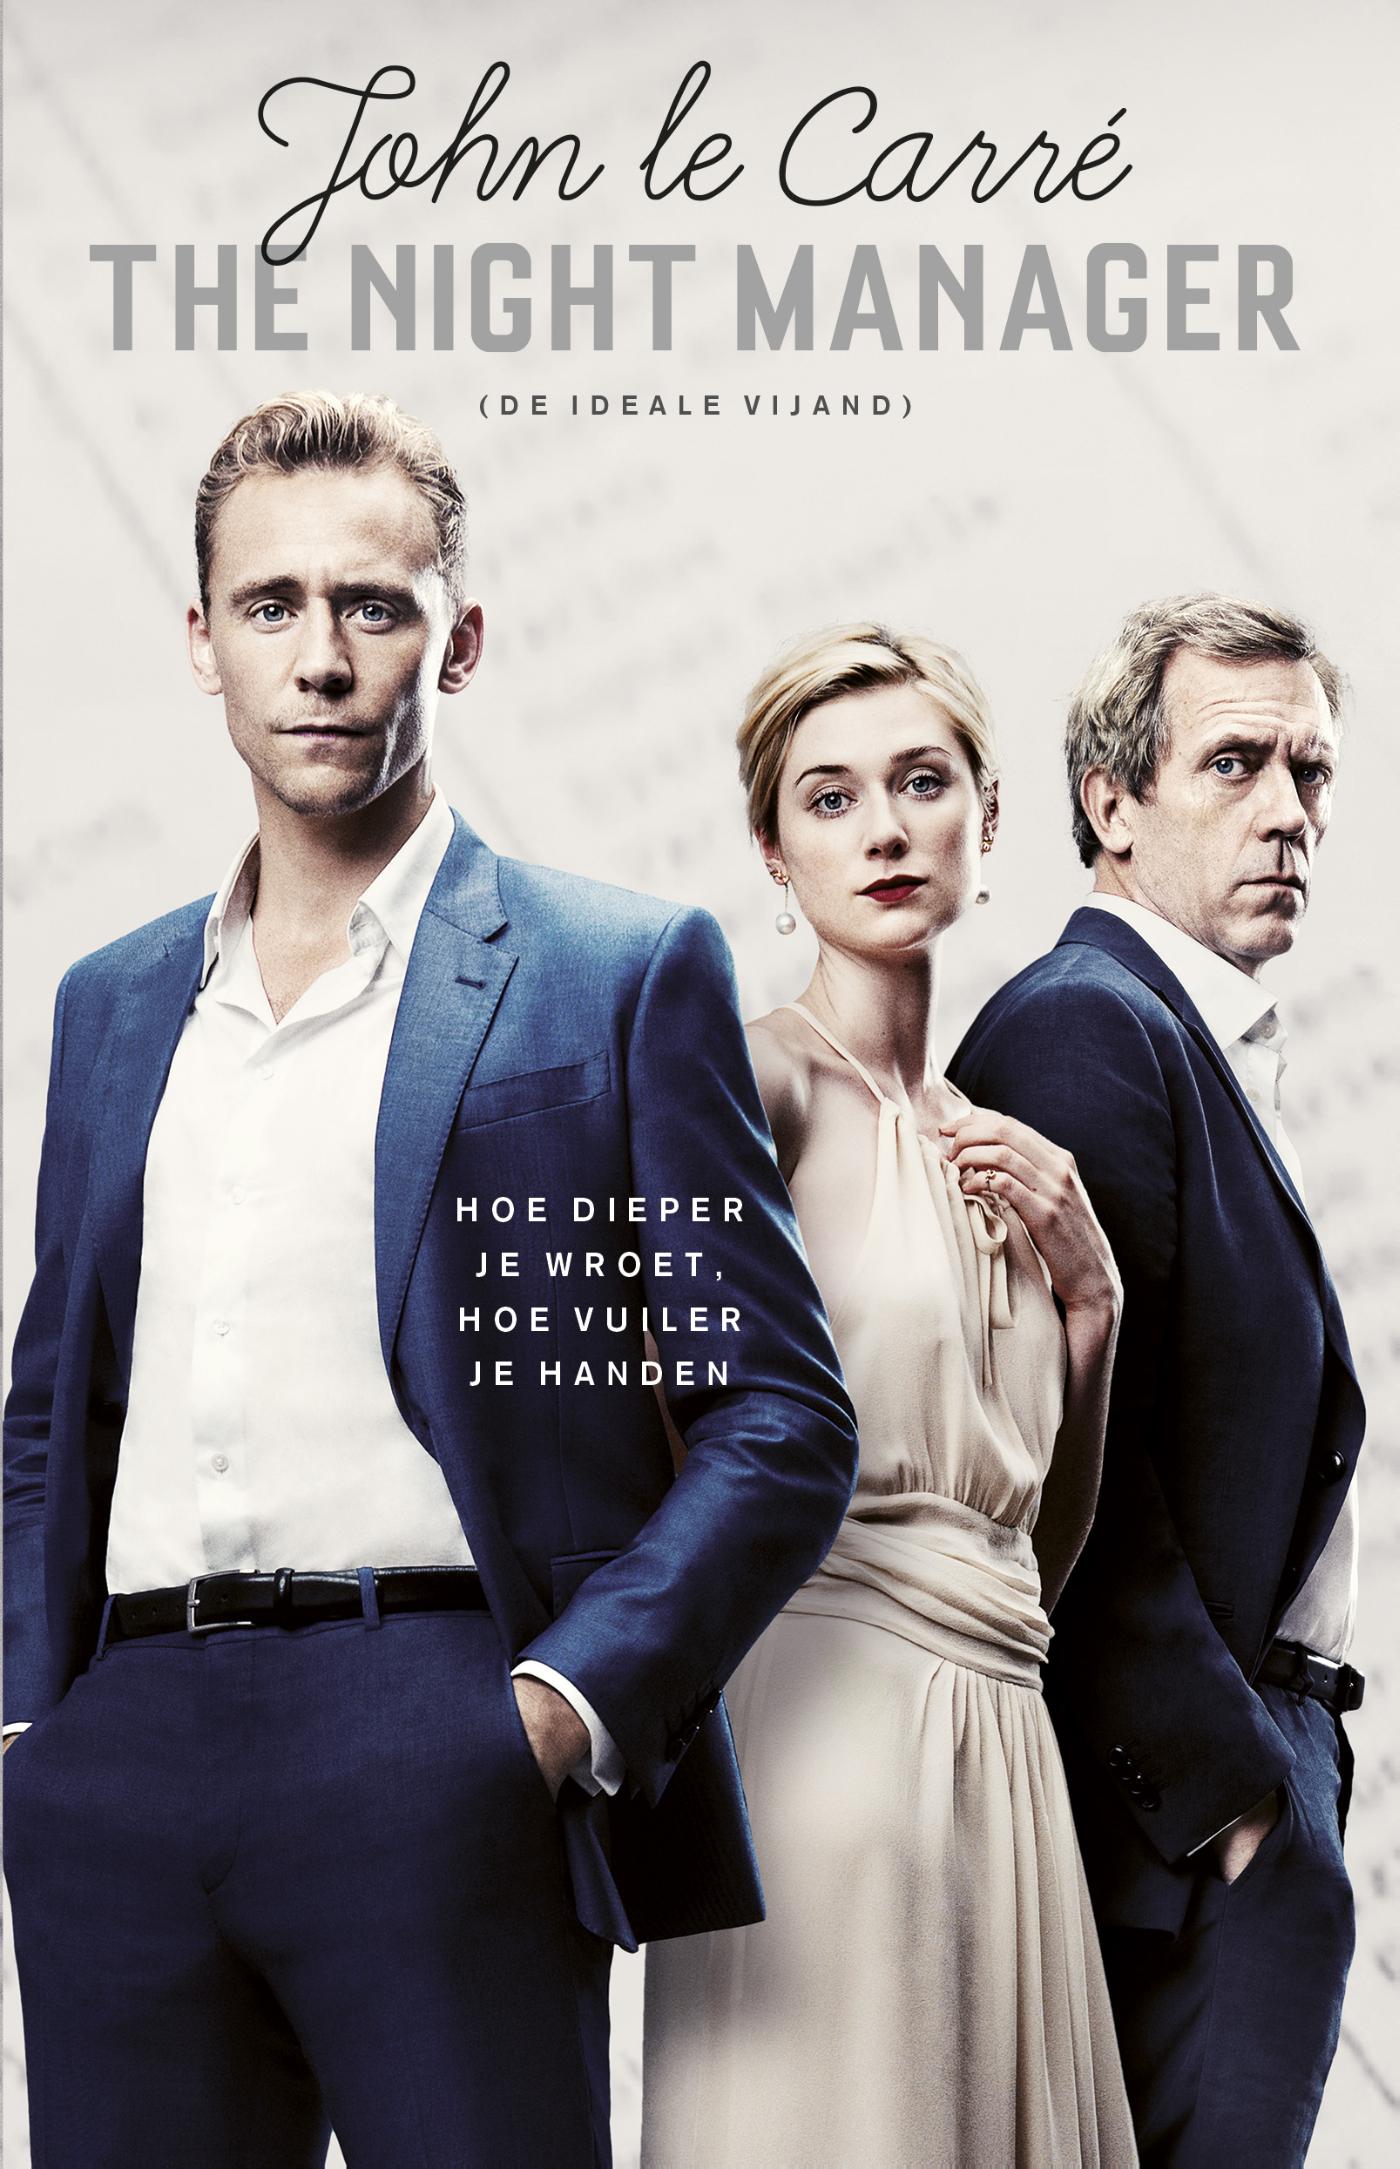 The night manager (Ebook)